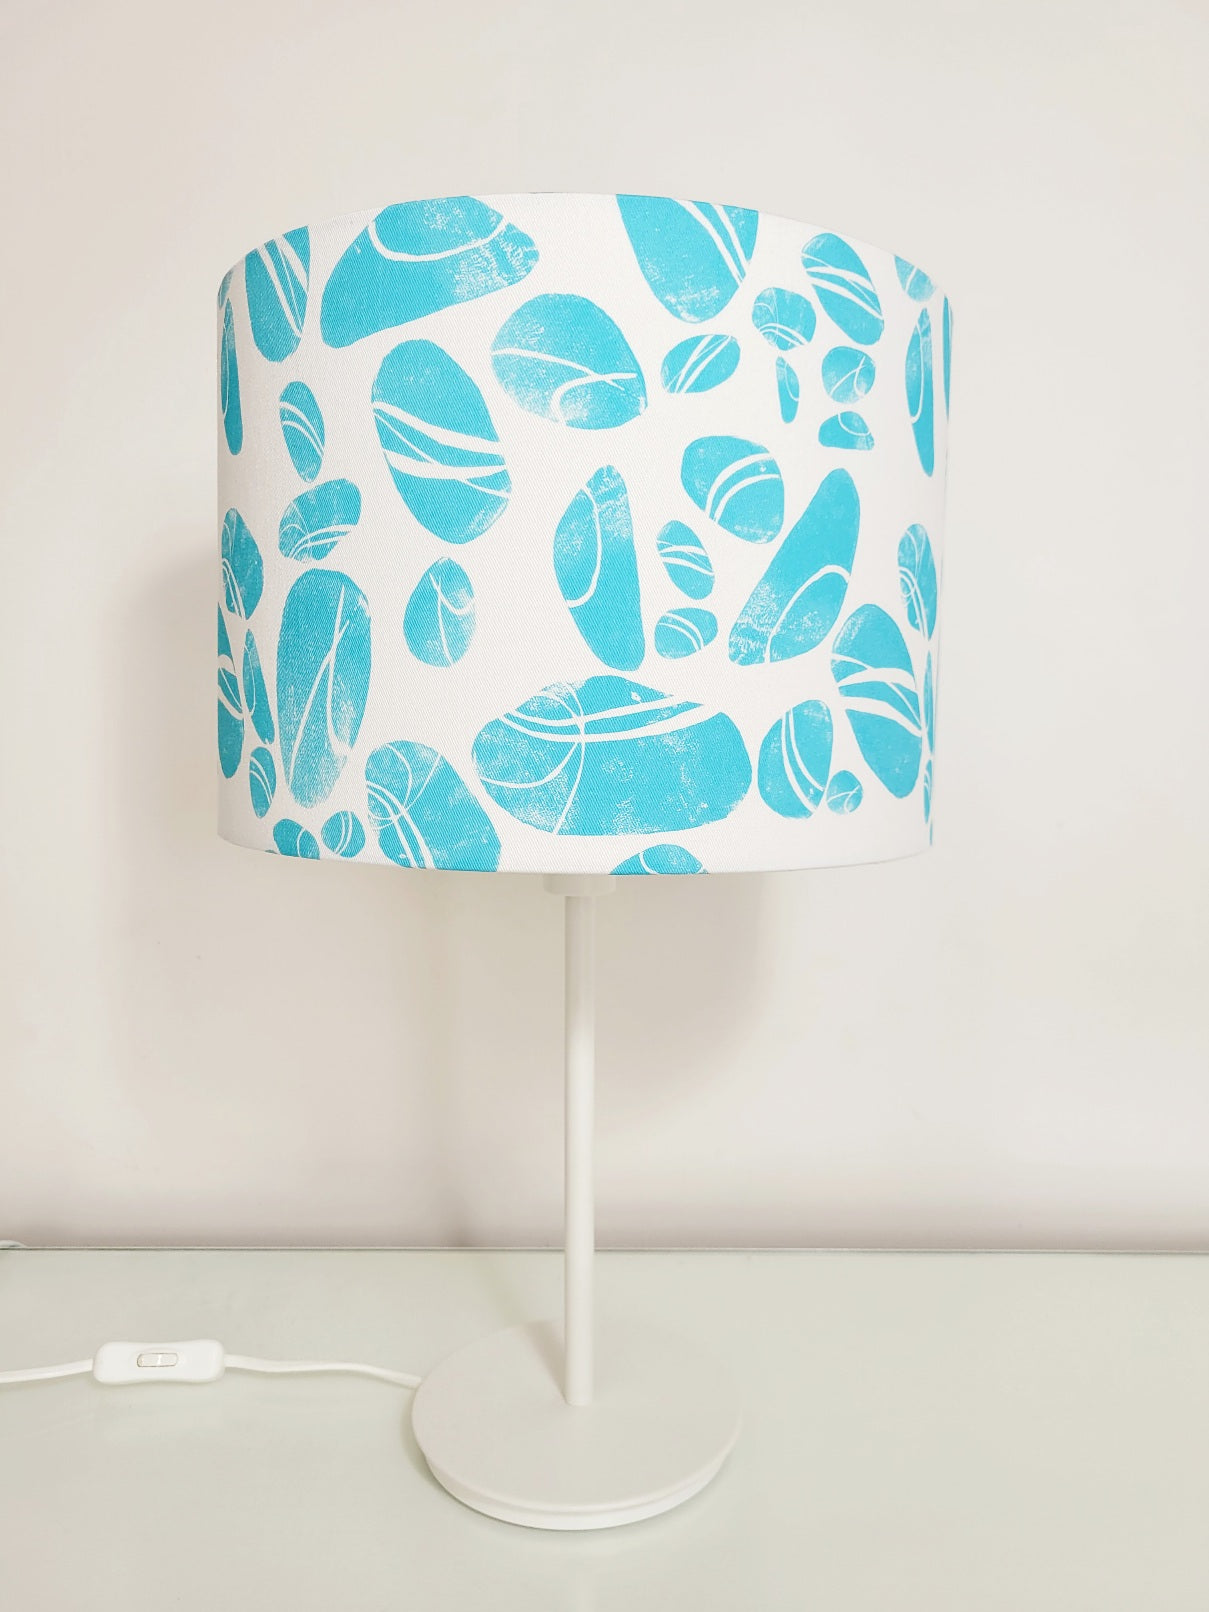 Large Pebbles Lampshade